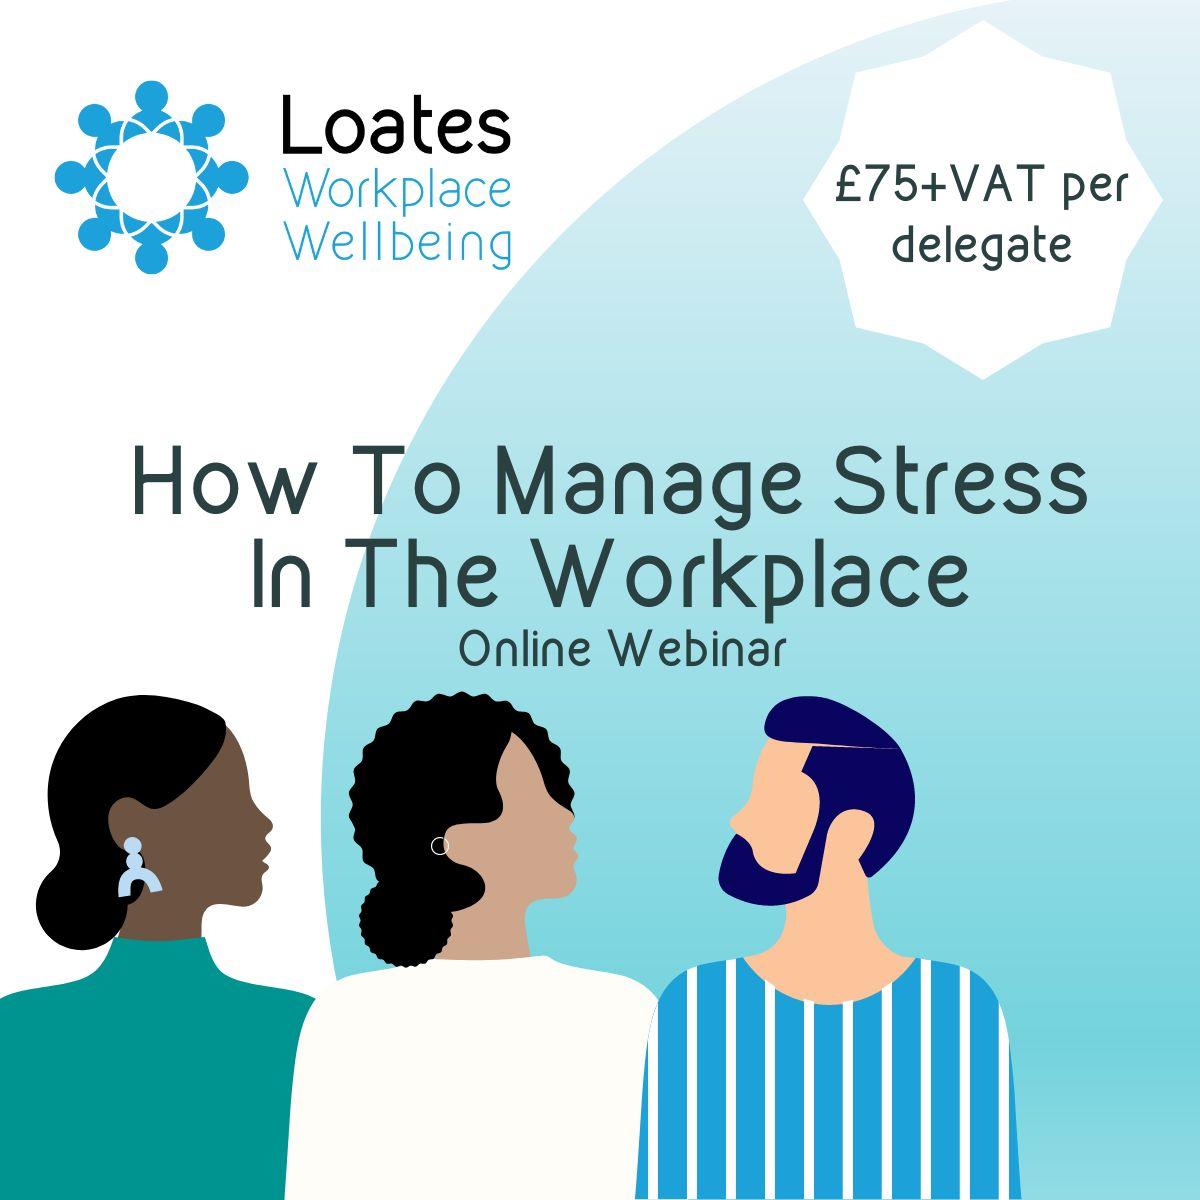 Take control of your workplace stress! Join us for our online training course on Thu 13 Apr 2023 to learn how to manage stress in the workplace. 🤩🤓 #StressManagement #WorkplaceWellbeing #OnlineTraining bit.ly/3kJemIt